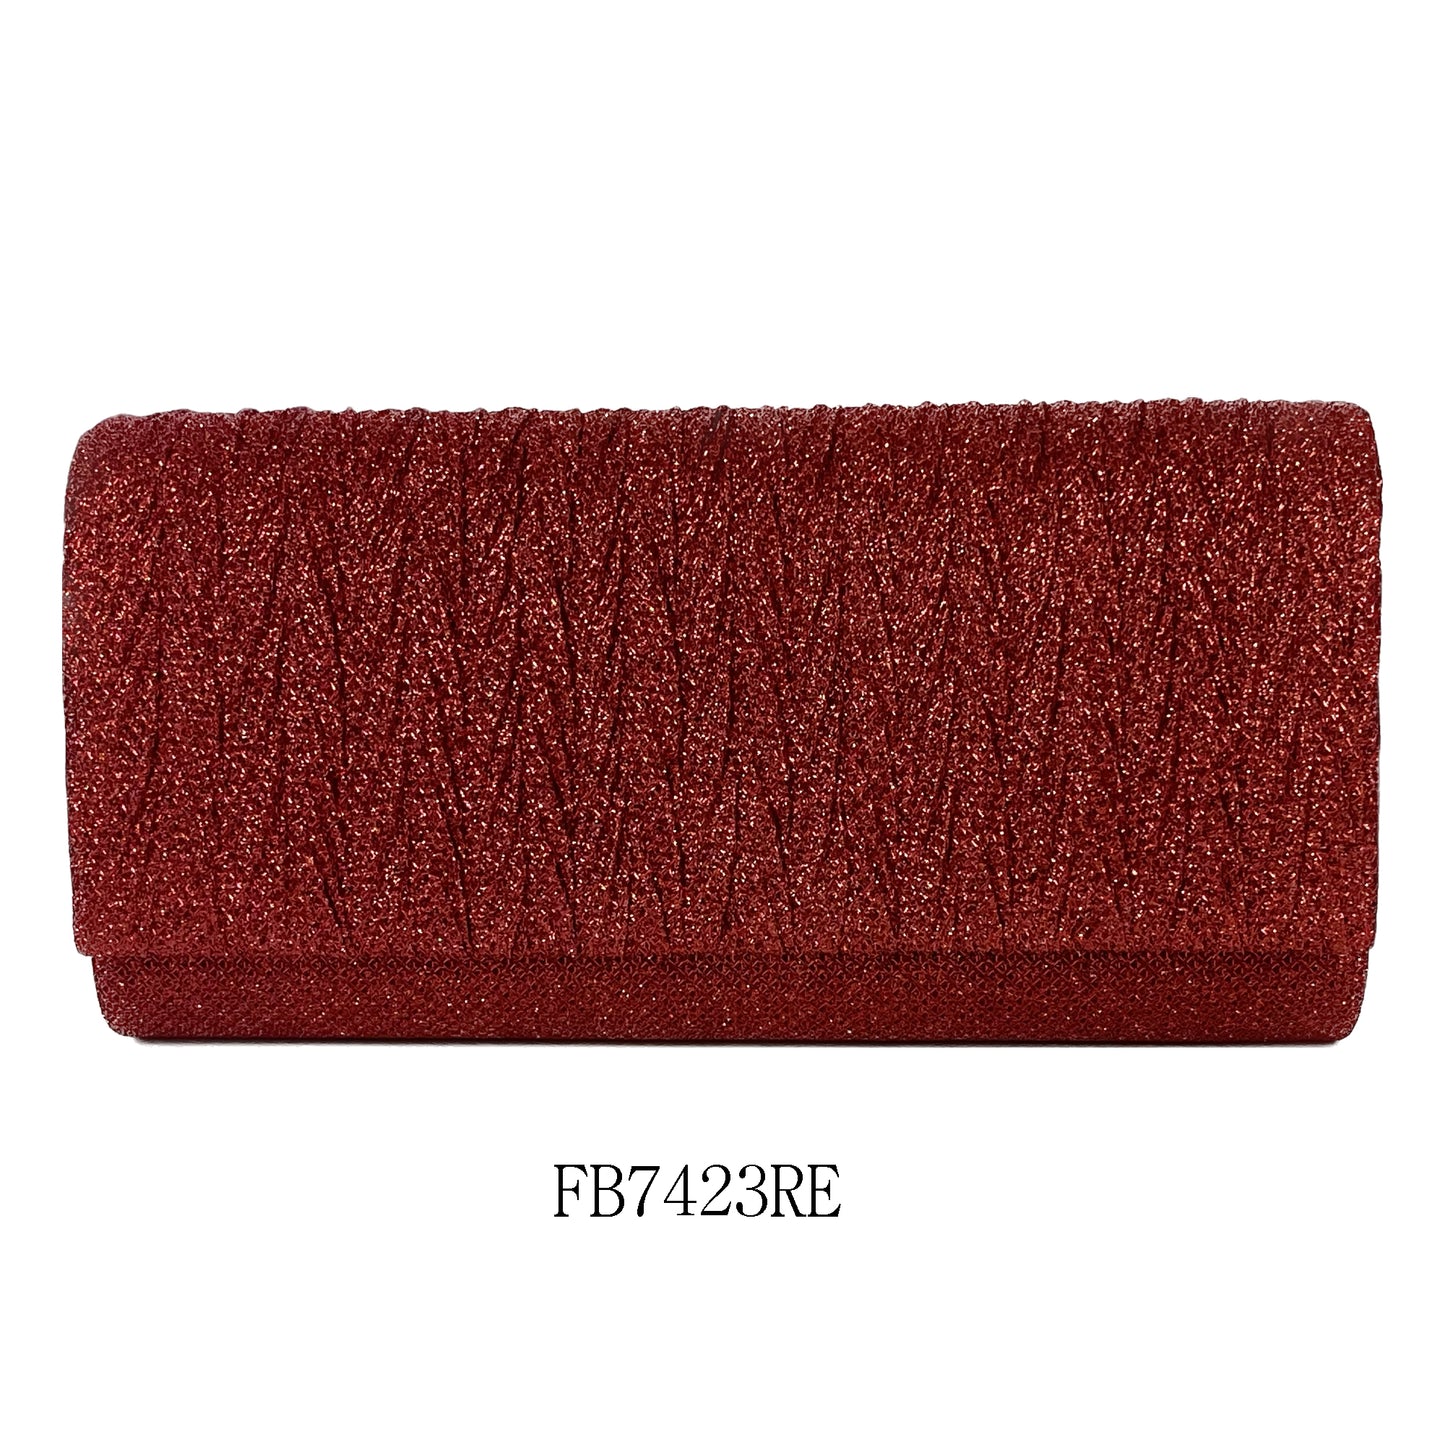 PLEATED ACCENT FASHION EVENING BAG 7423 (3PC)